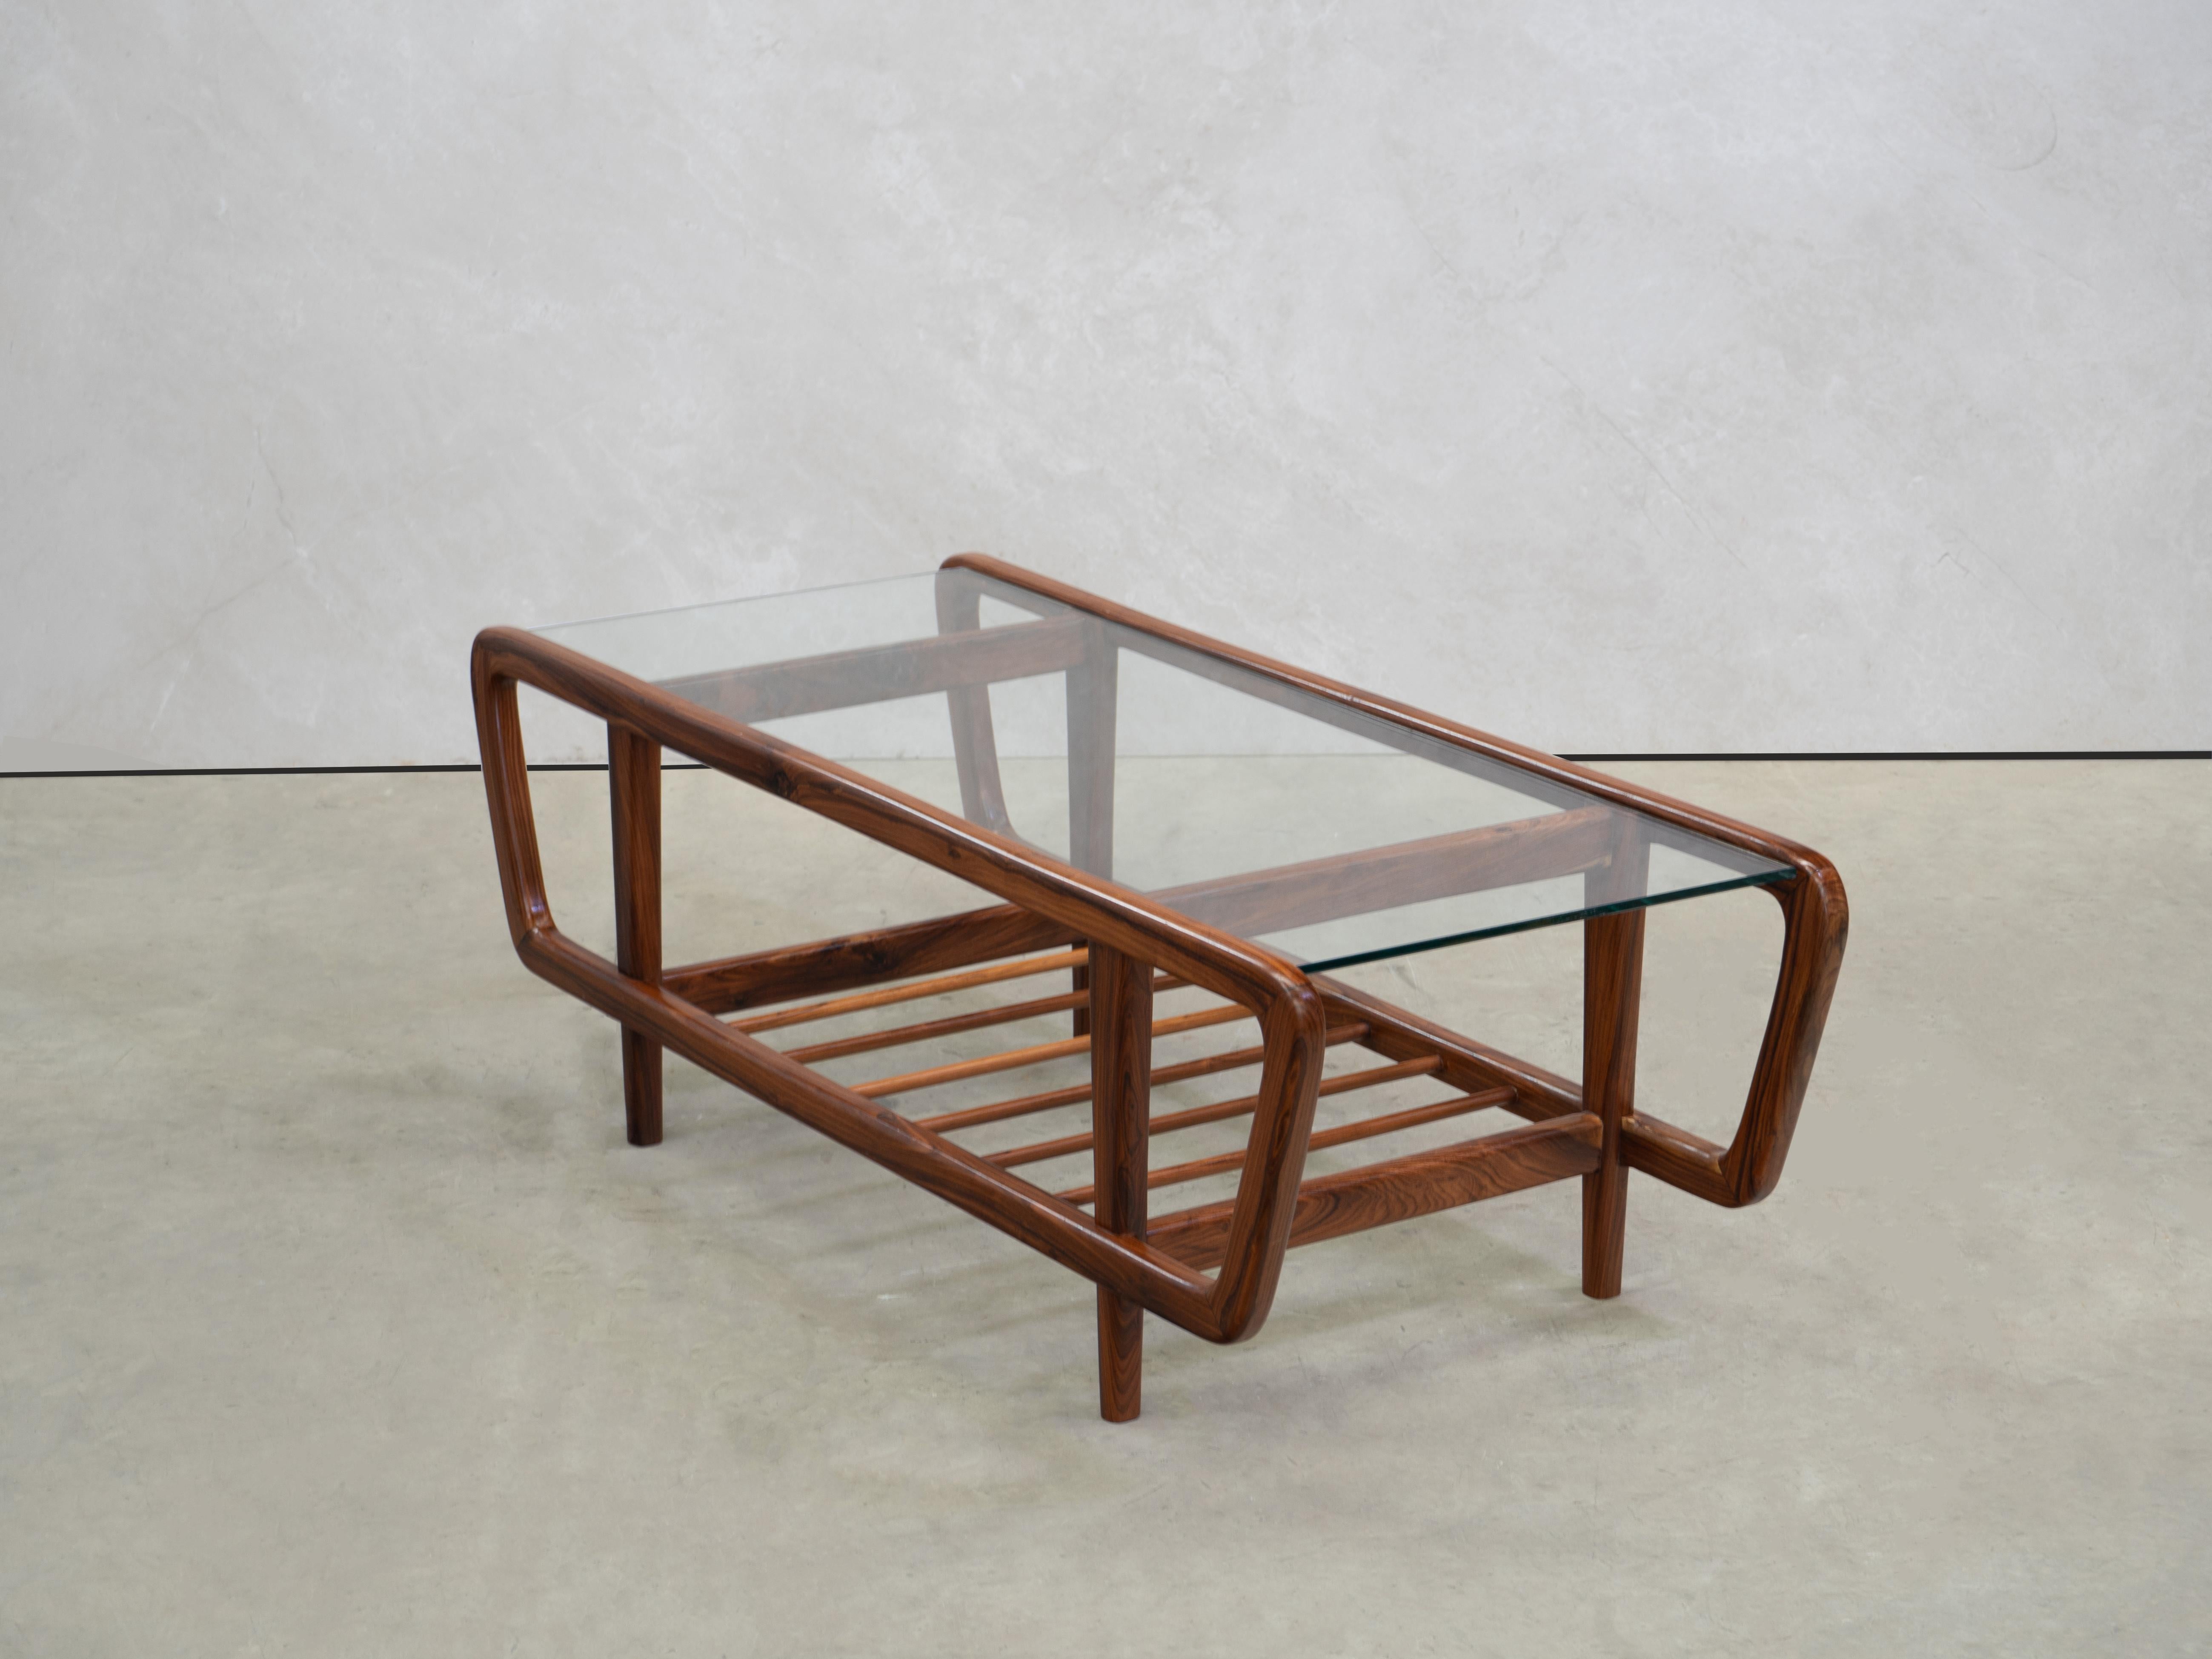 Designed by Giuseppe Scapinelli, the coffee table is made rosewood and has a glass top. The coffee table was softly restored.

A single structure, with curved lines, holds the glass, framing the piece and the straight tapered legs lift the table